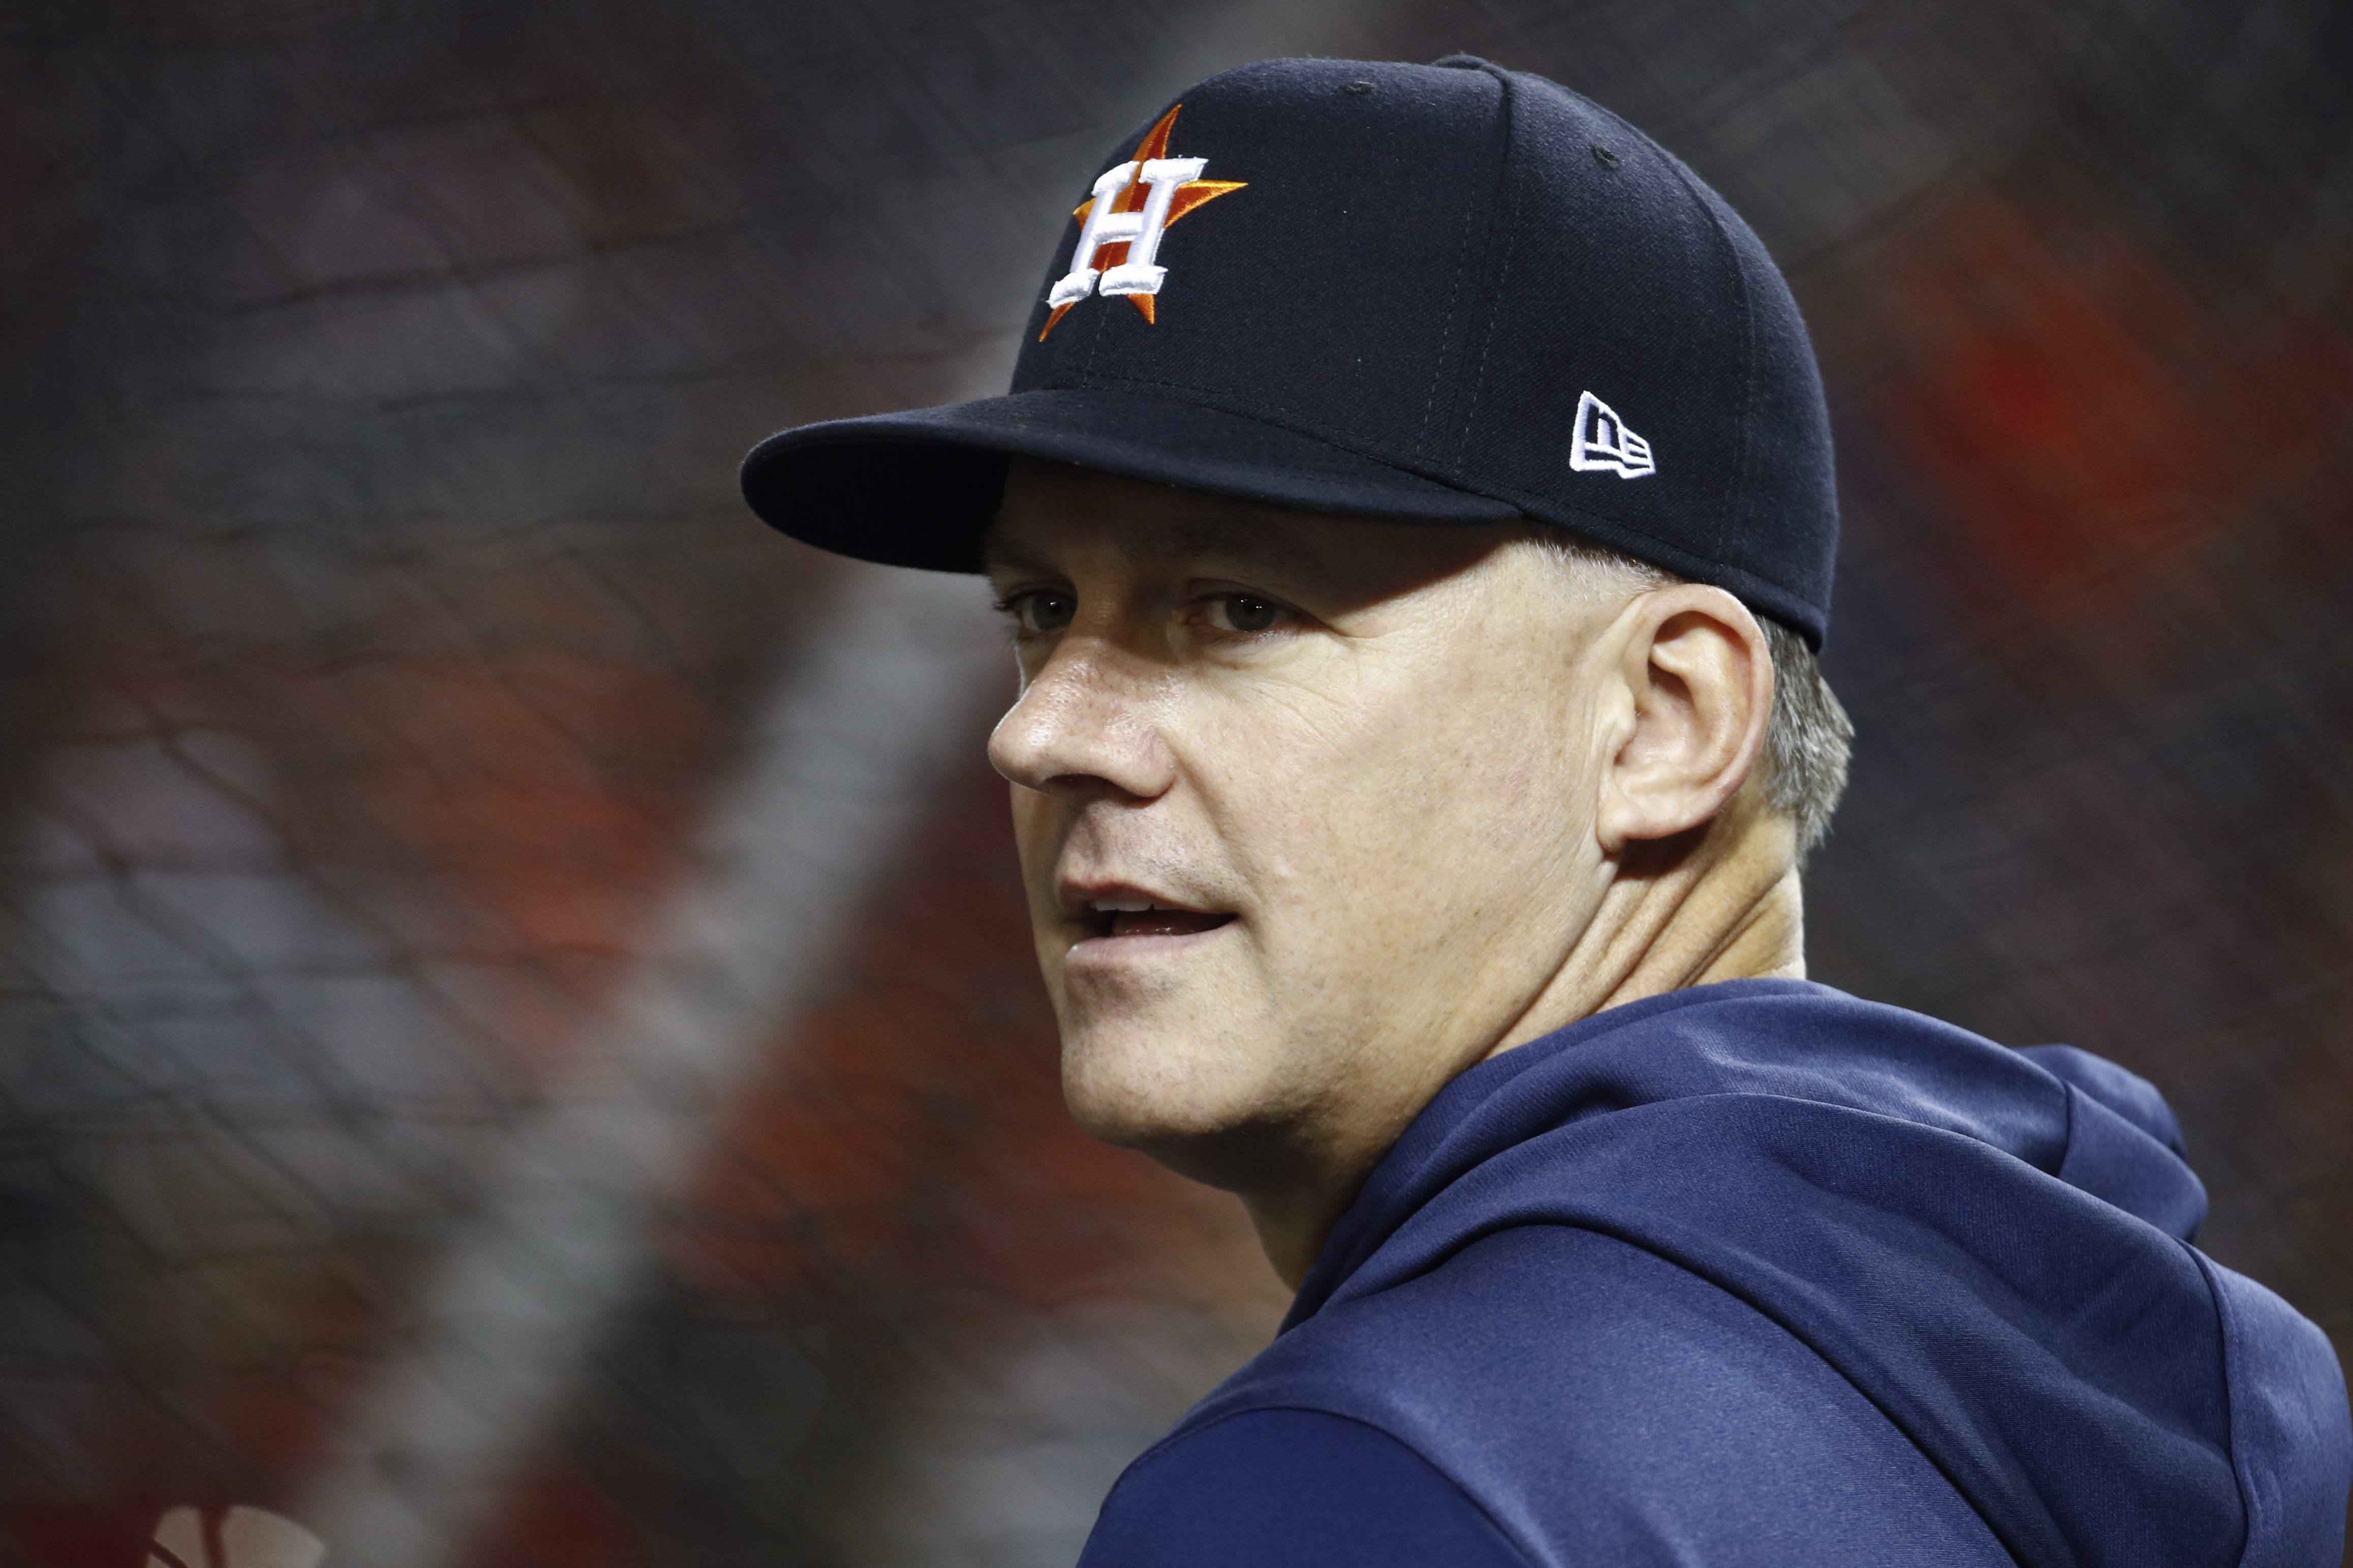 Tigers hire ex-Astros manager AJ Hinch, fresh off suspension for